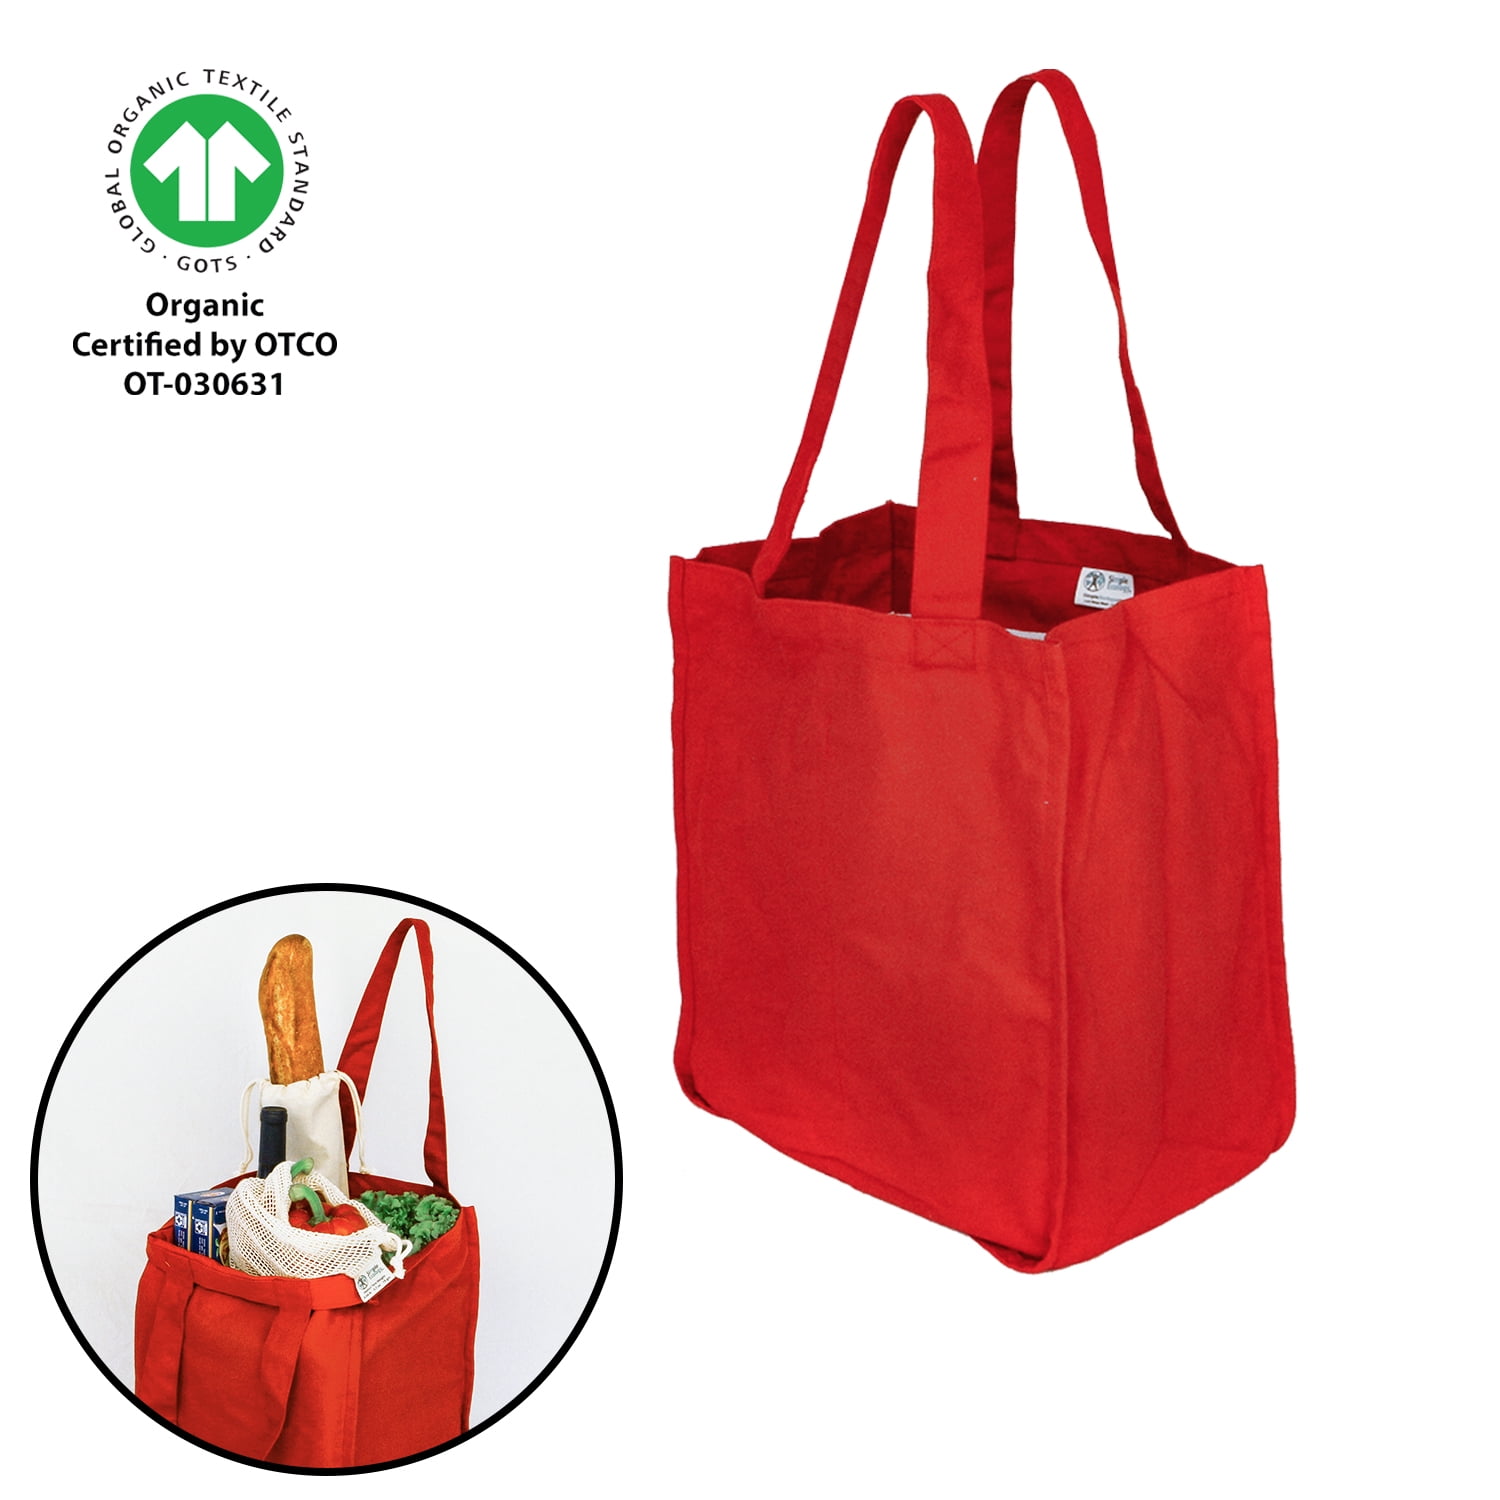 Simple Ecology Organic Cotton Deluxe Reusable Grocery Shopping Bag; Bottle  Sleeves, Rigid Bottom Support (UPDATED DESIGN)